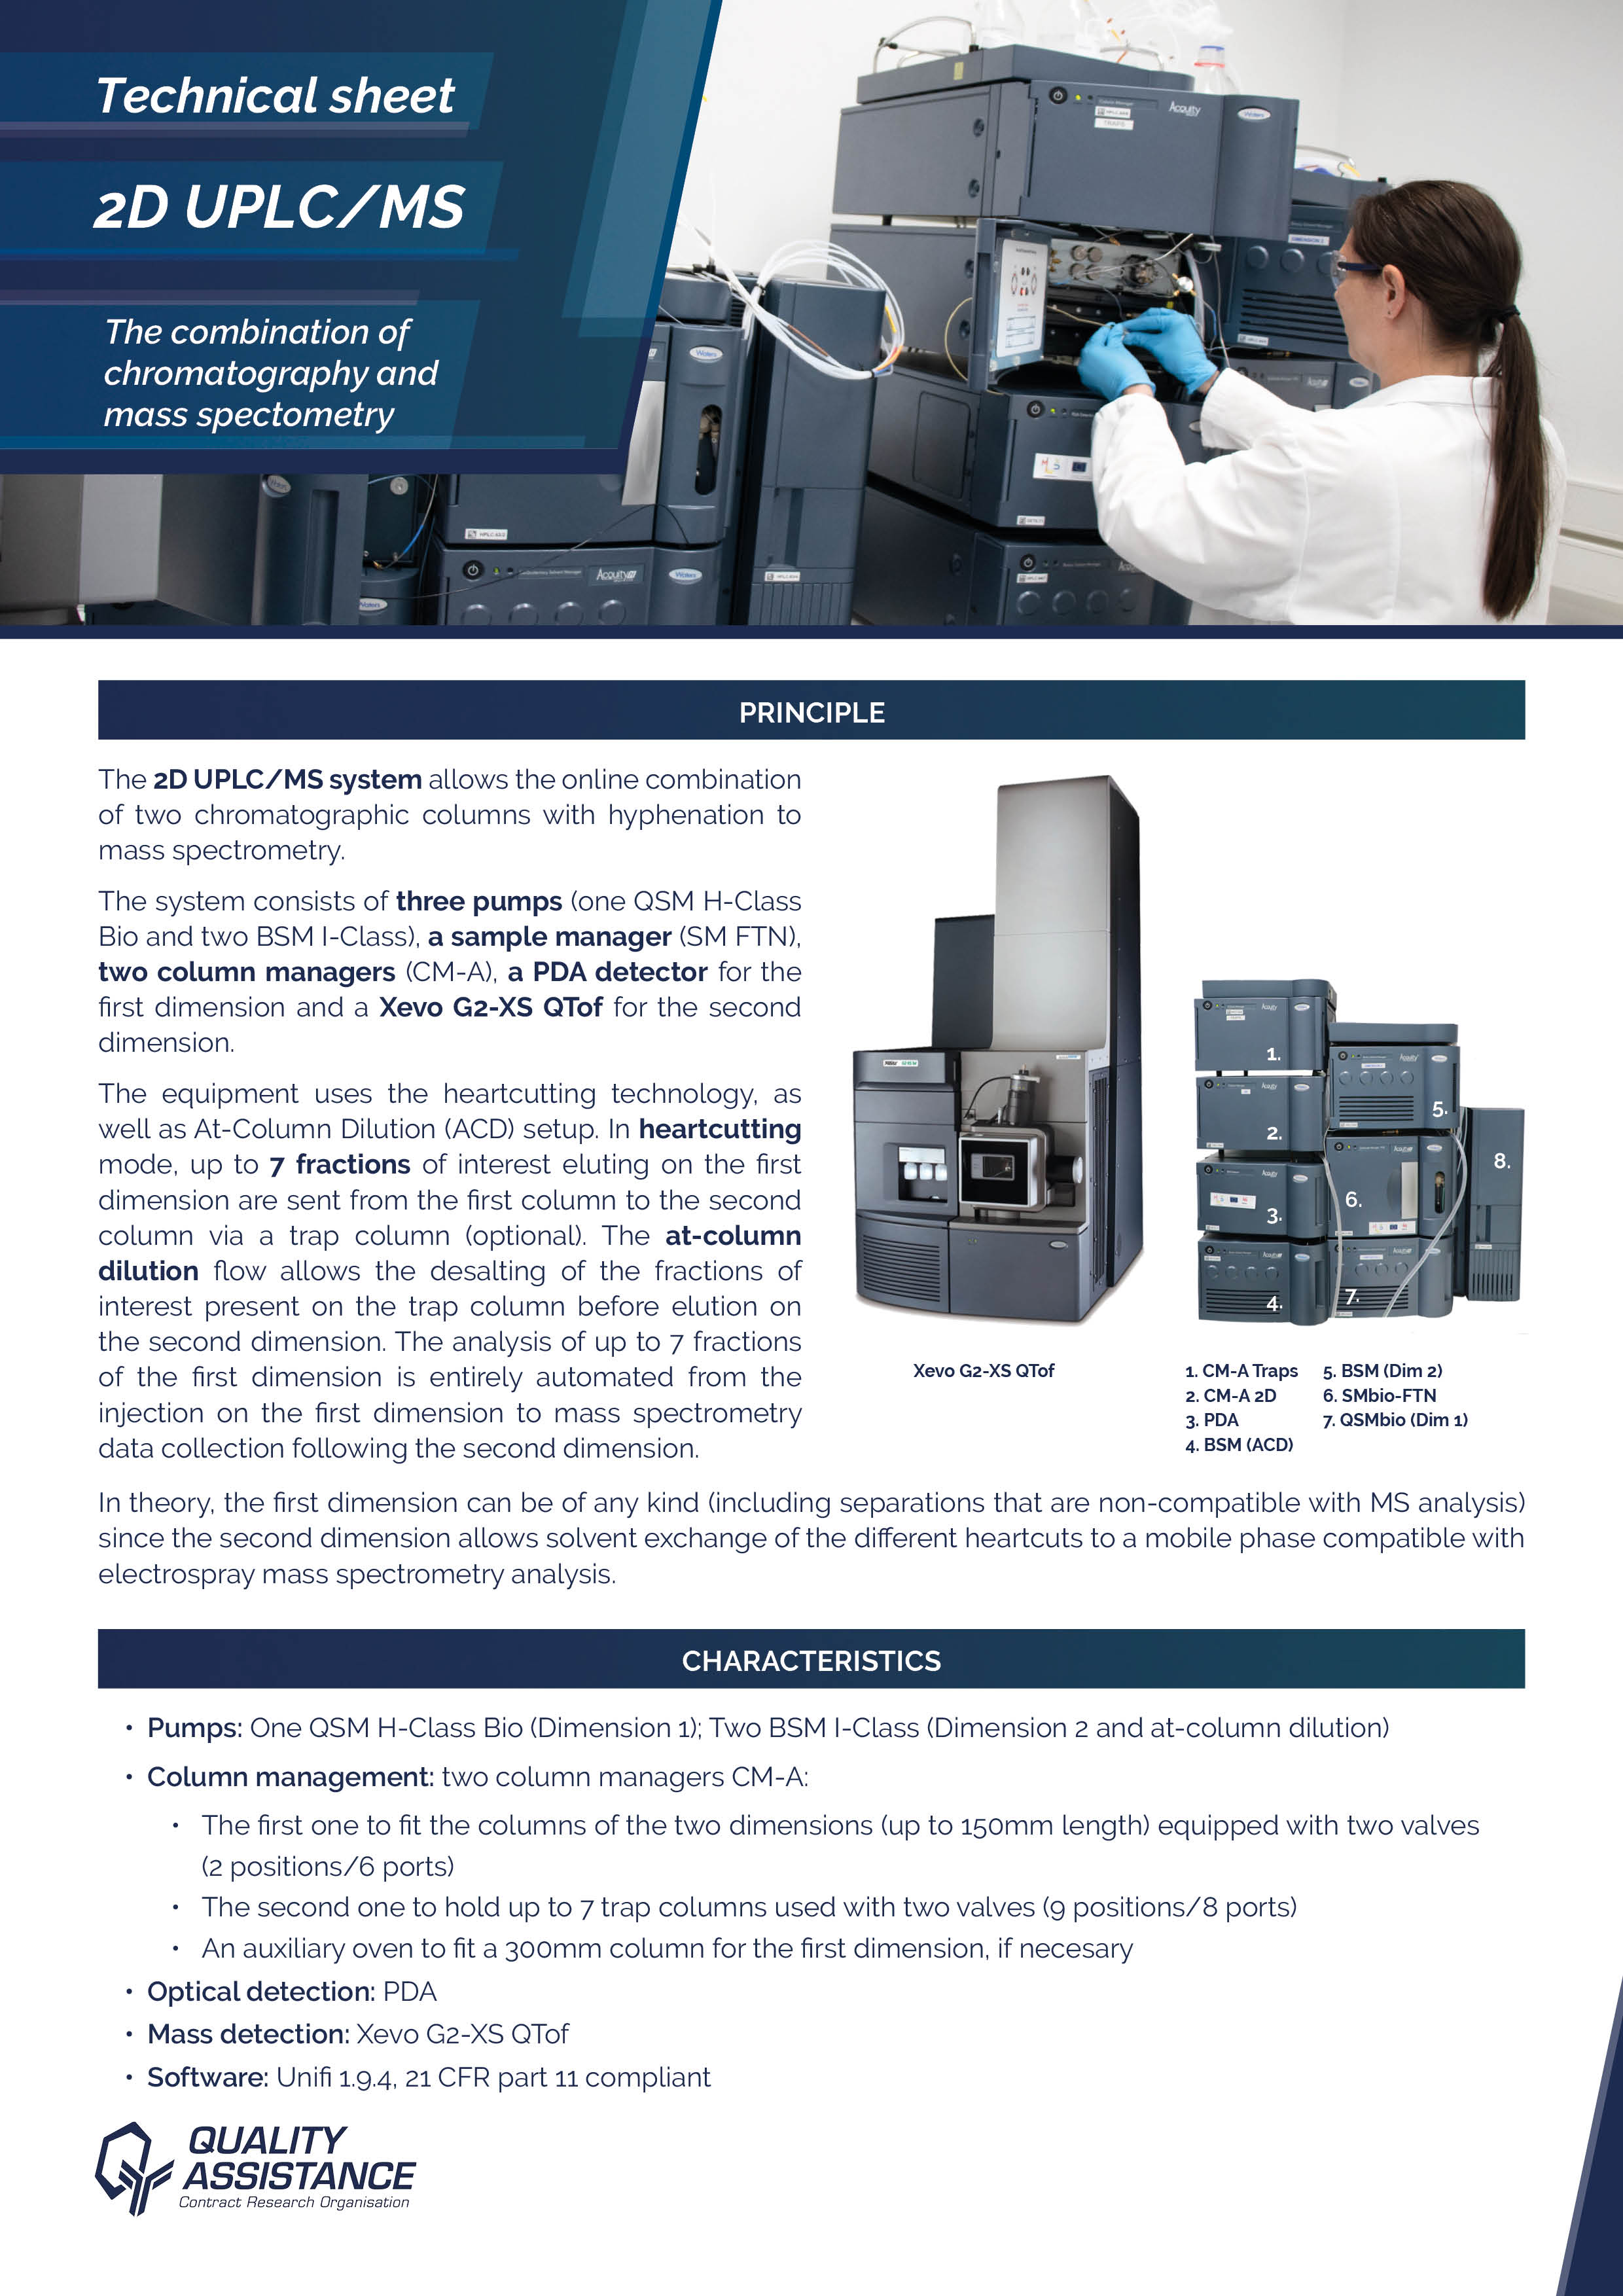 2D UPLC-MS at Quality Assistance